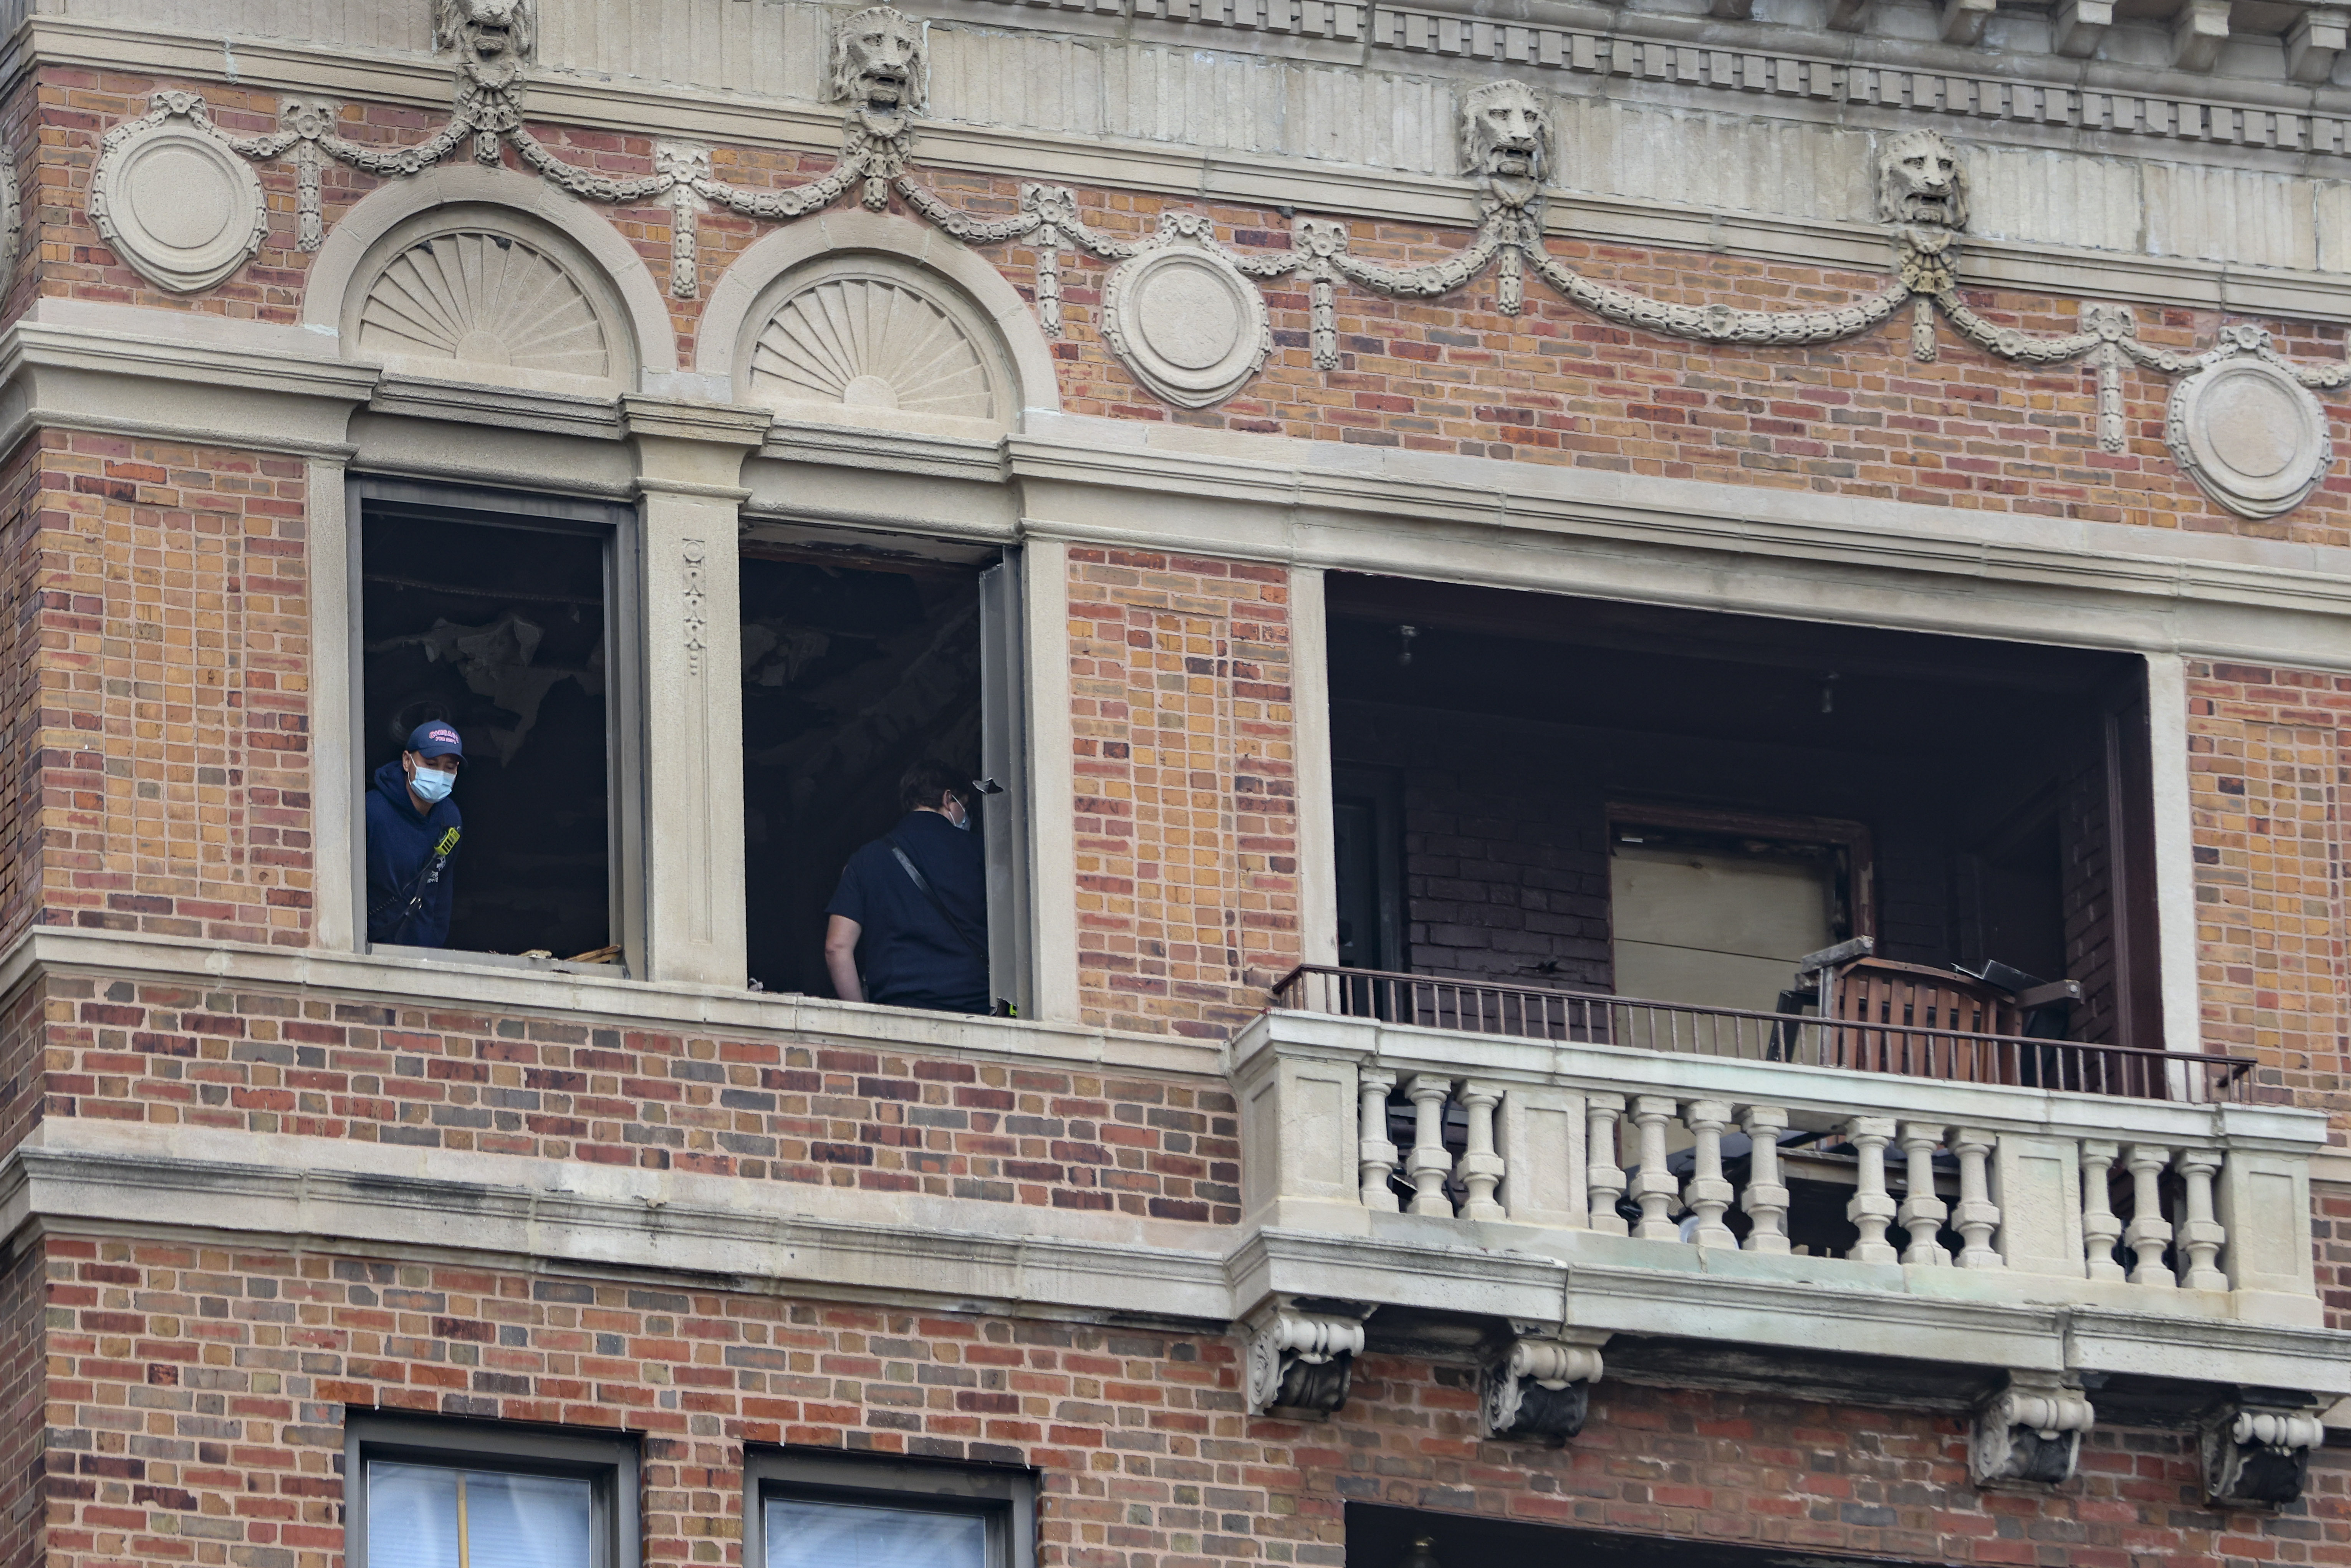 Fire department personnel inside the apartment Tuesday, Oct. 5, 2021, near the 400 block of West Wrightwood Avenue in Lincoln Park where a fire took place on the 7th floor and a man fatally jumped out of the window to escape.